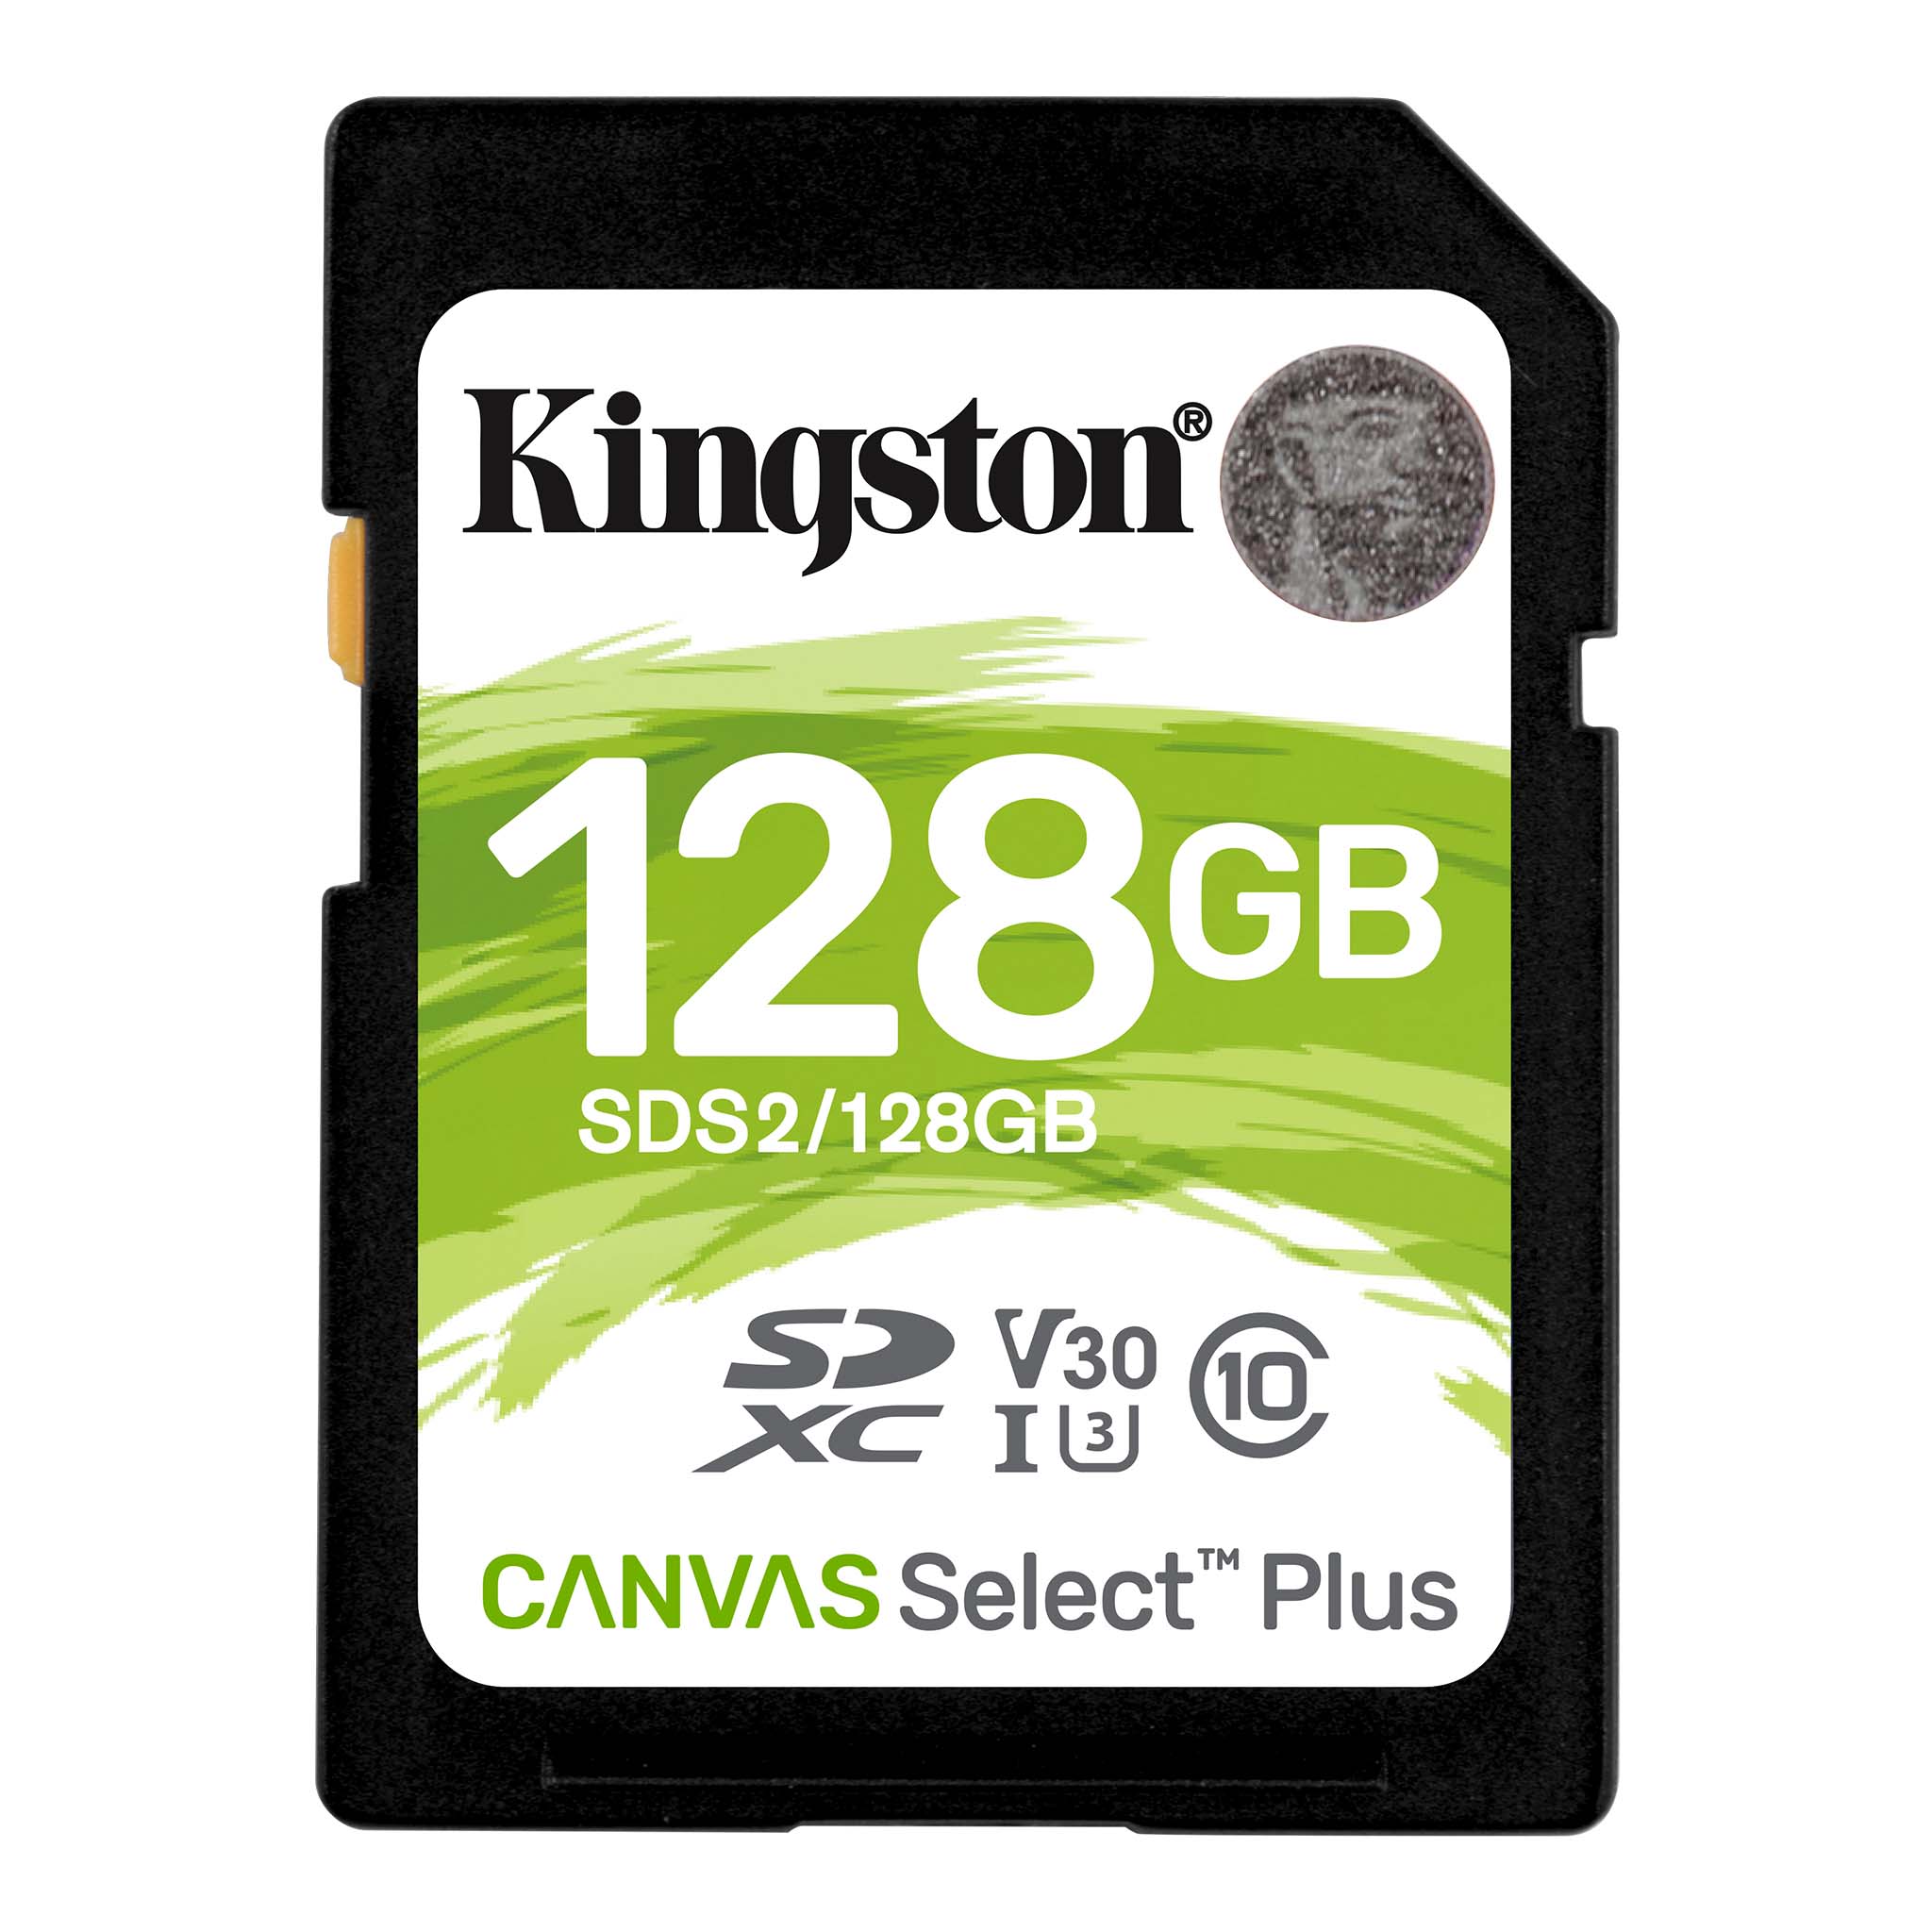 100MBs Works with Kingston Kingston 32GB Samsung SM-T801 MicroSDHC Canvas Select Plus Card Verified by SanFlash.